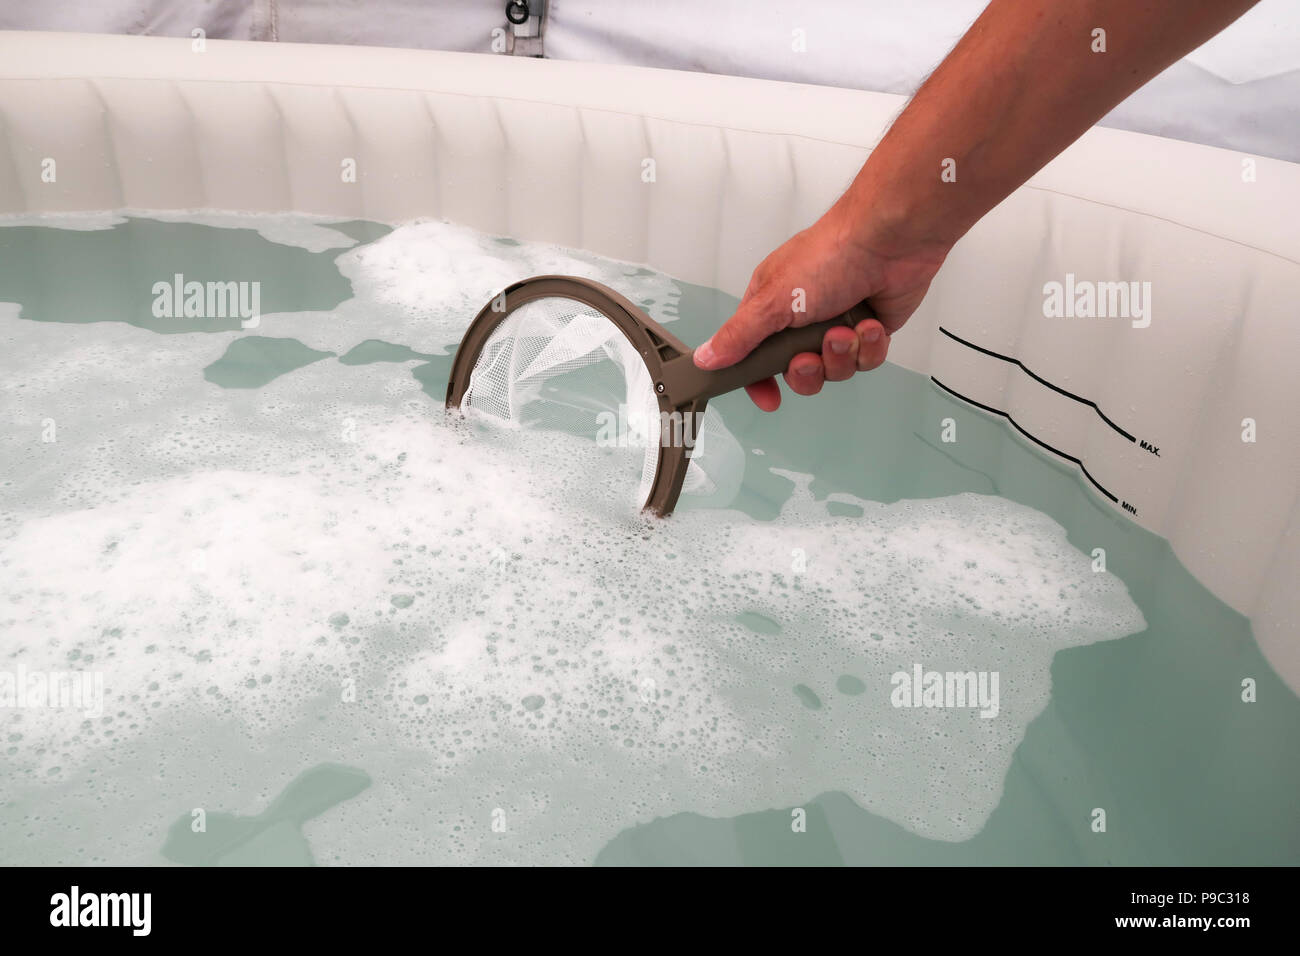 Skimming inflatable hot tub water Stock Photo